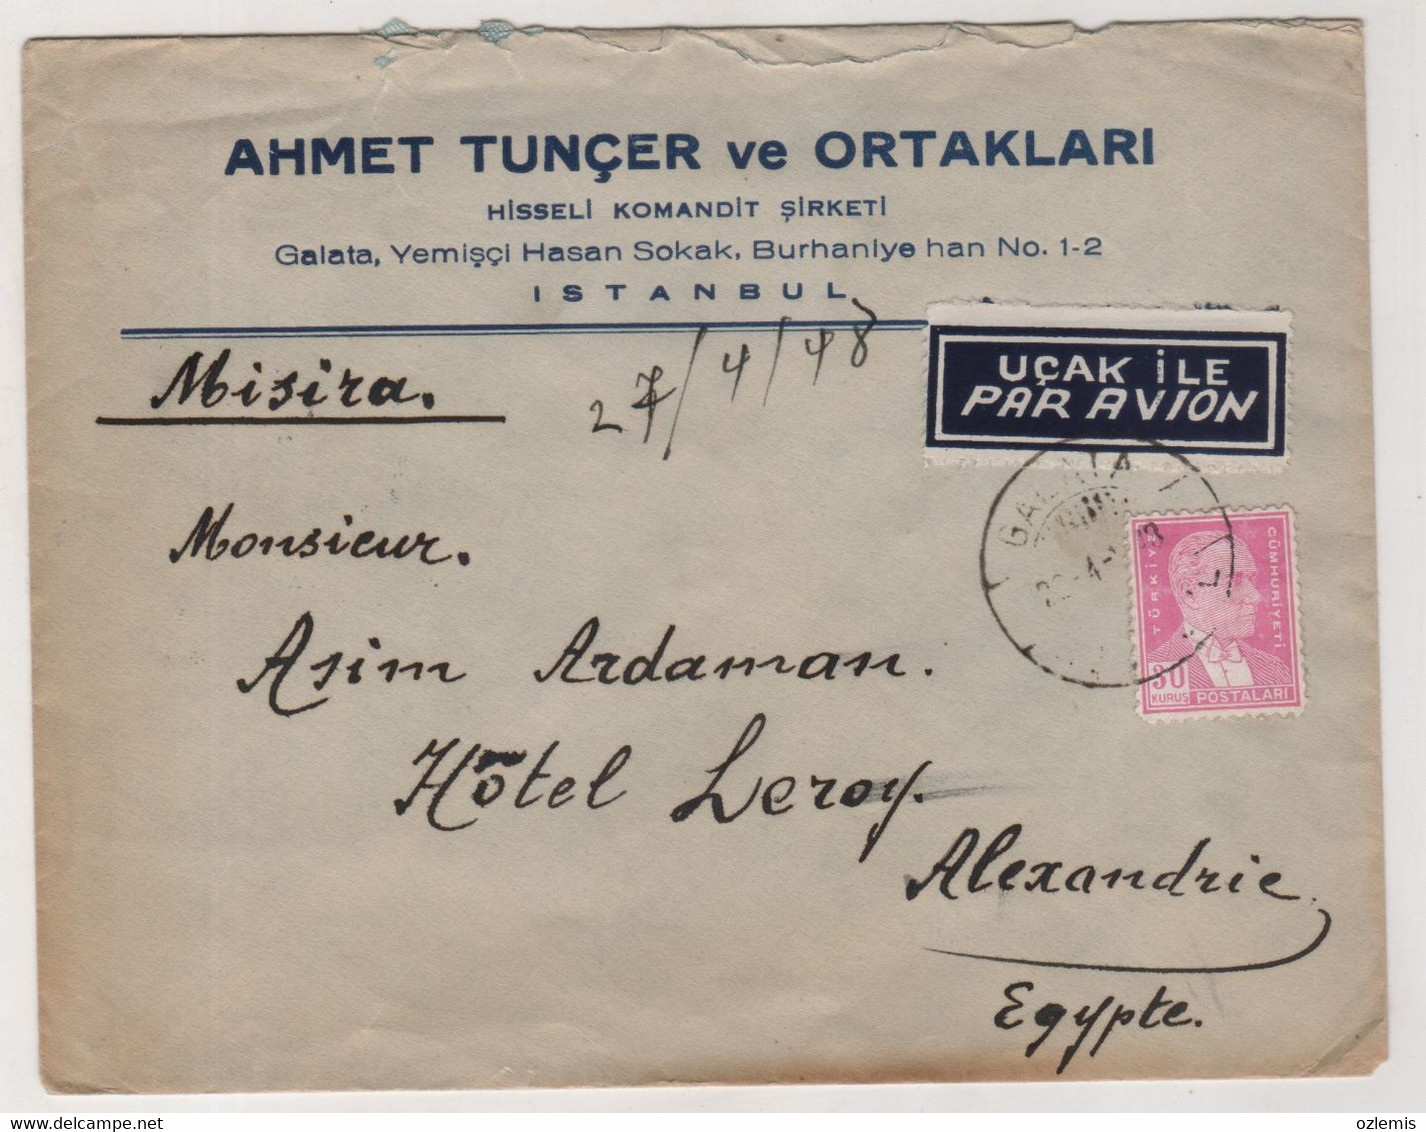 TURKEY -ISTANBUL  TO  EGYPTE  1948  USED COVER - Lettres & Documents